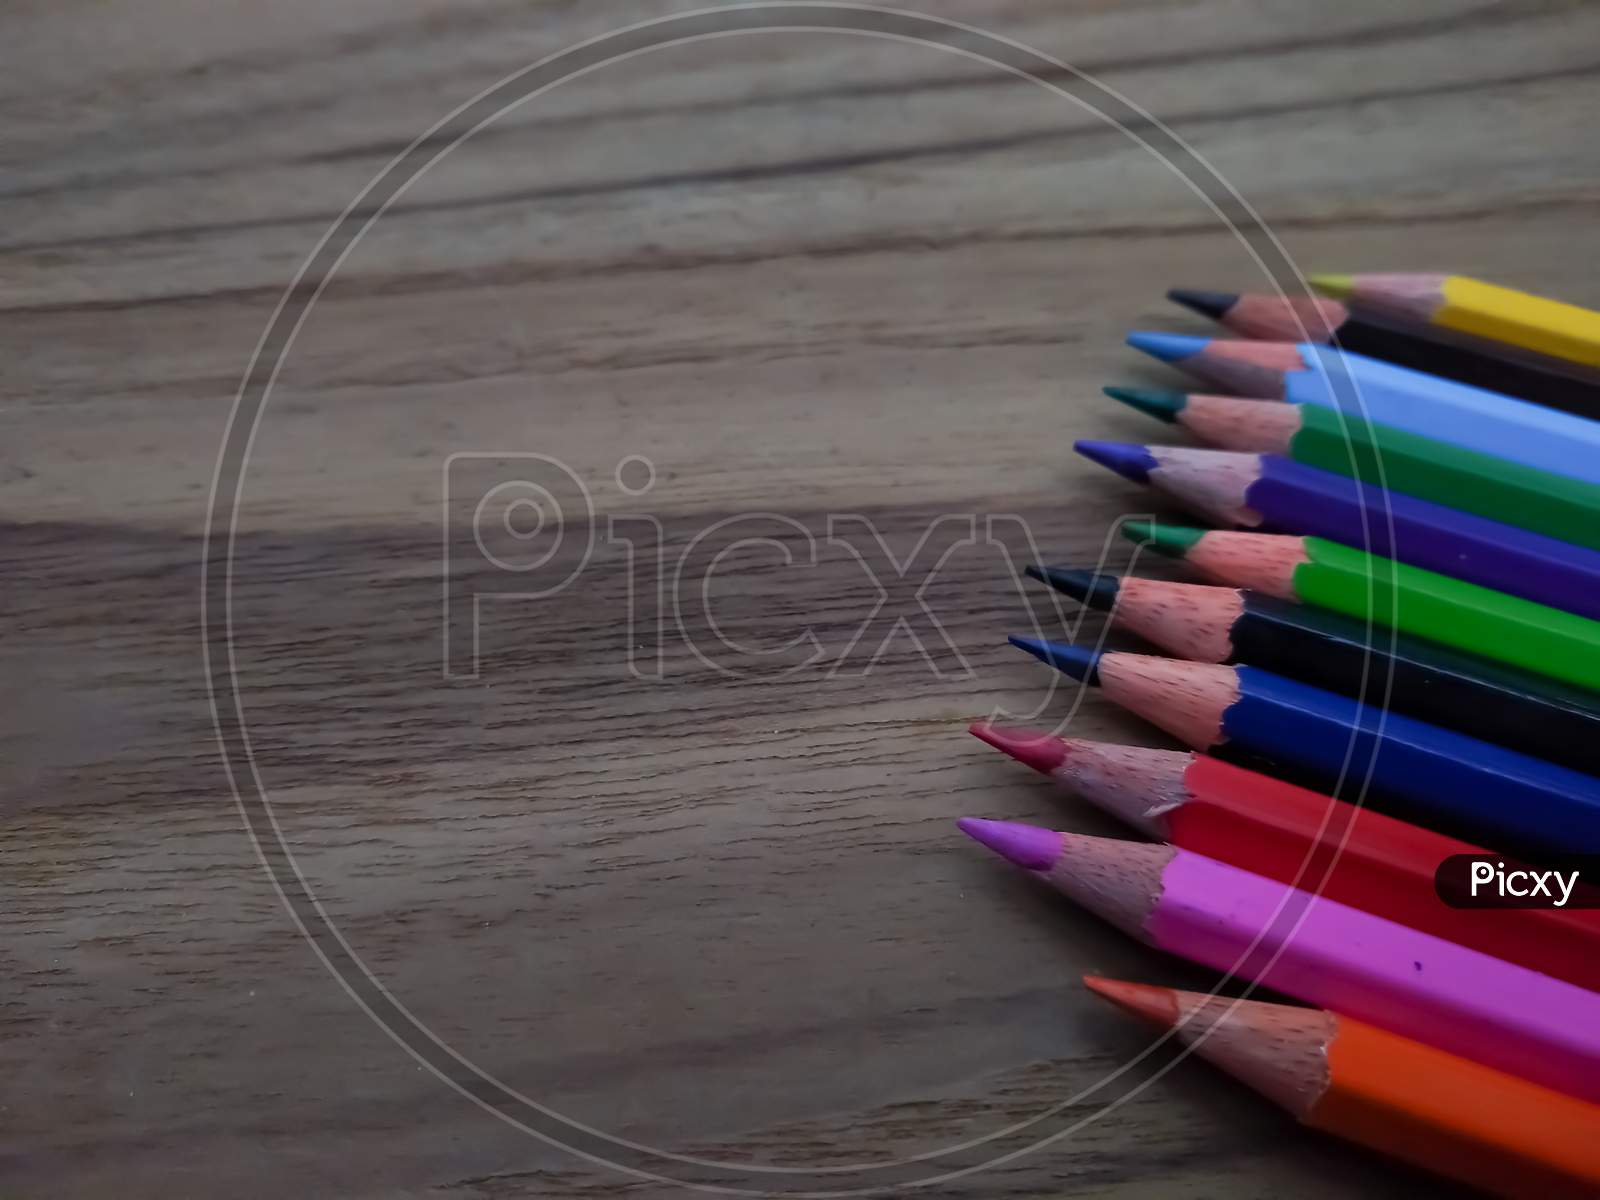 Colour pencils on wooden background